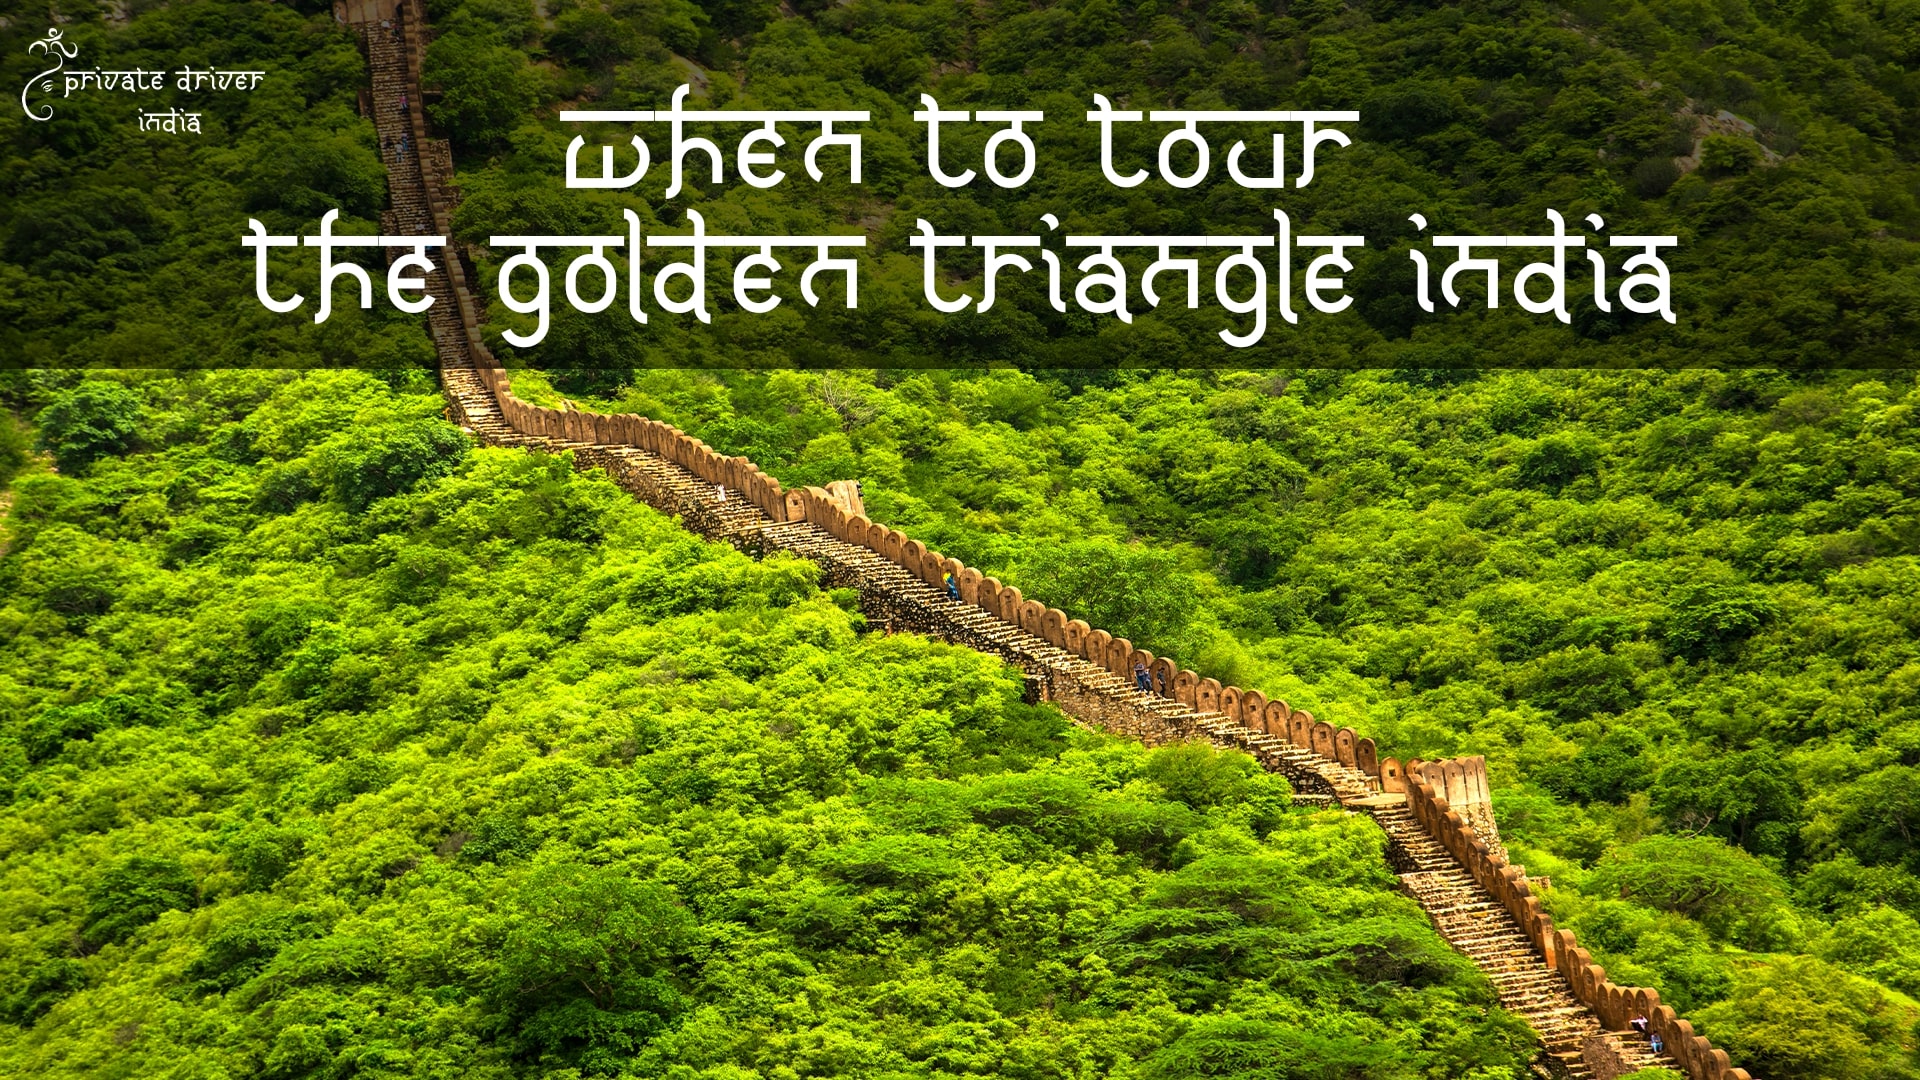 When to Travel the Golden Triangle India